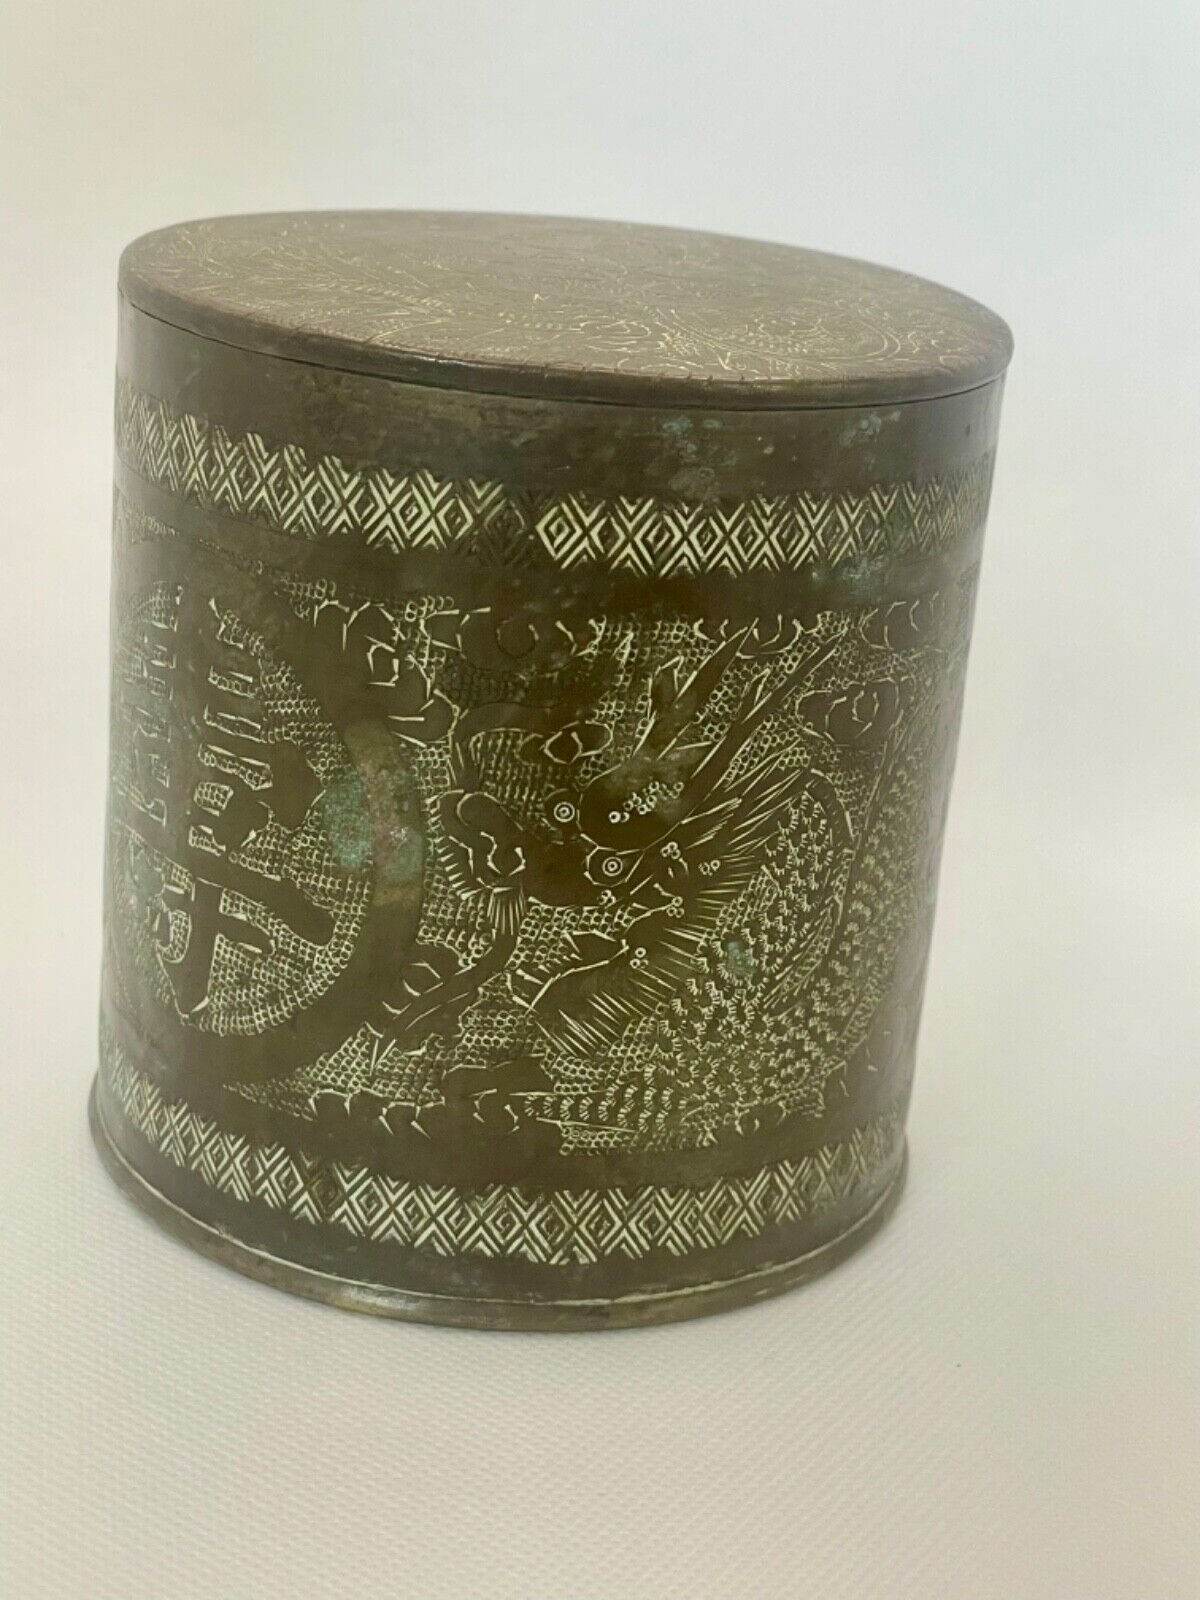 vintage etched brass container China stamped